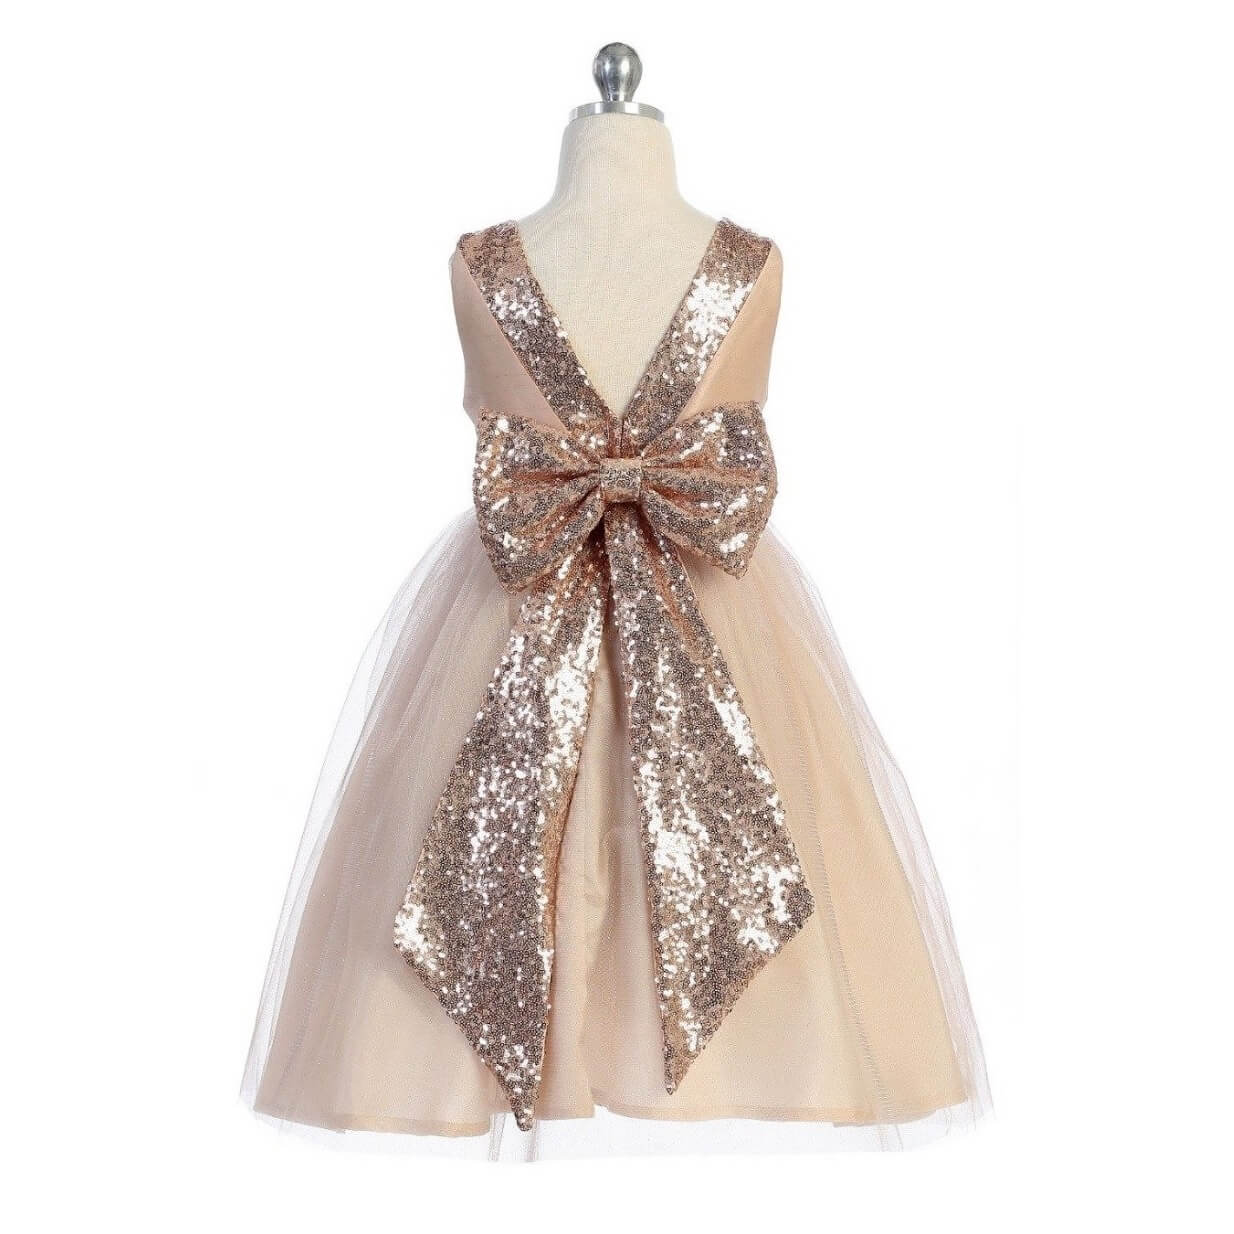 Rear detailing on blush coloured girls dress with sequin bow